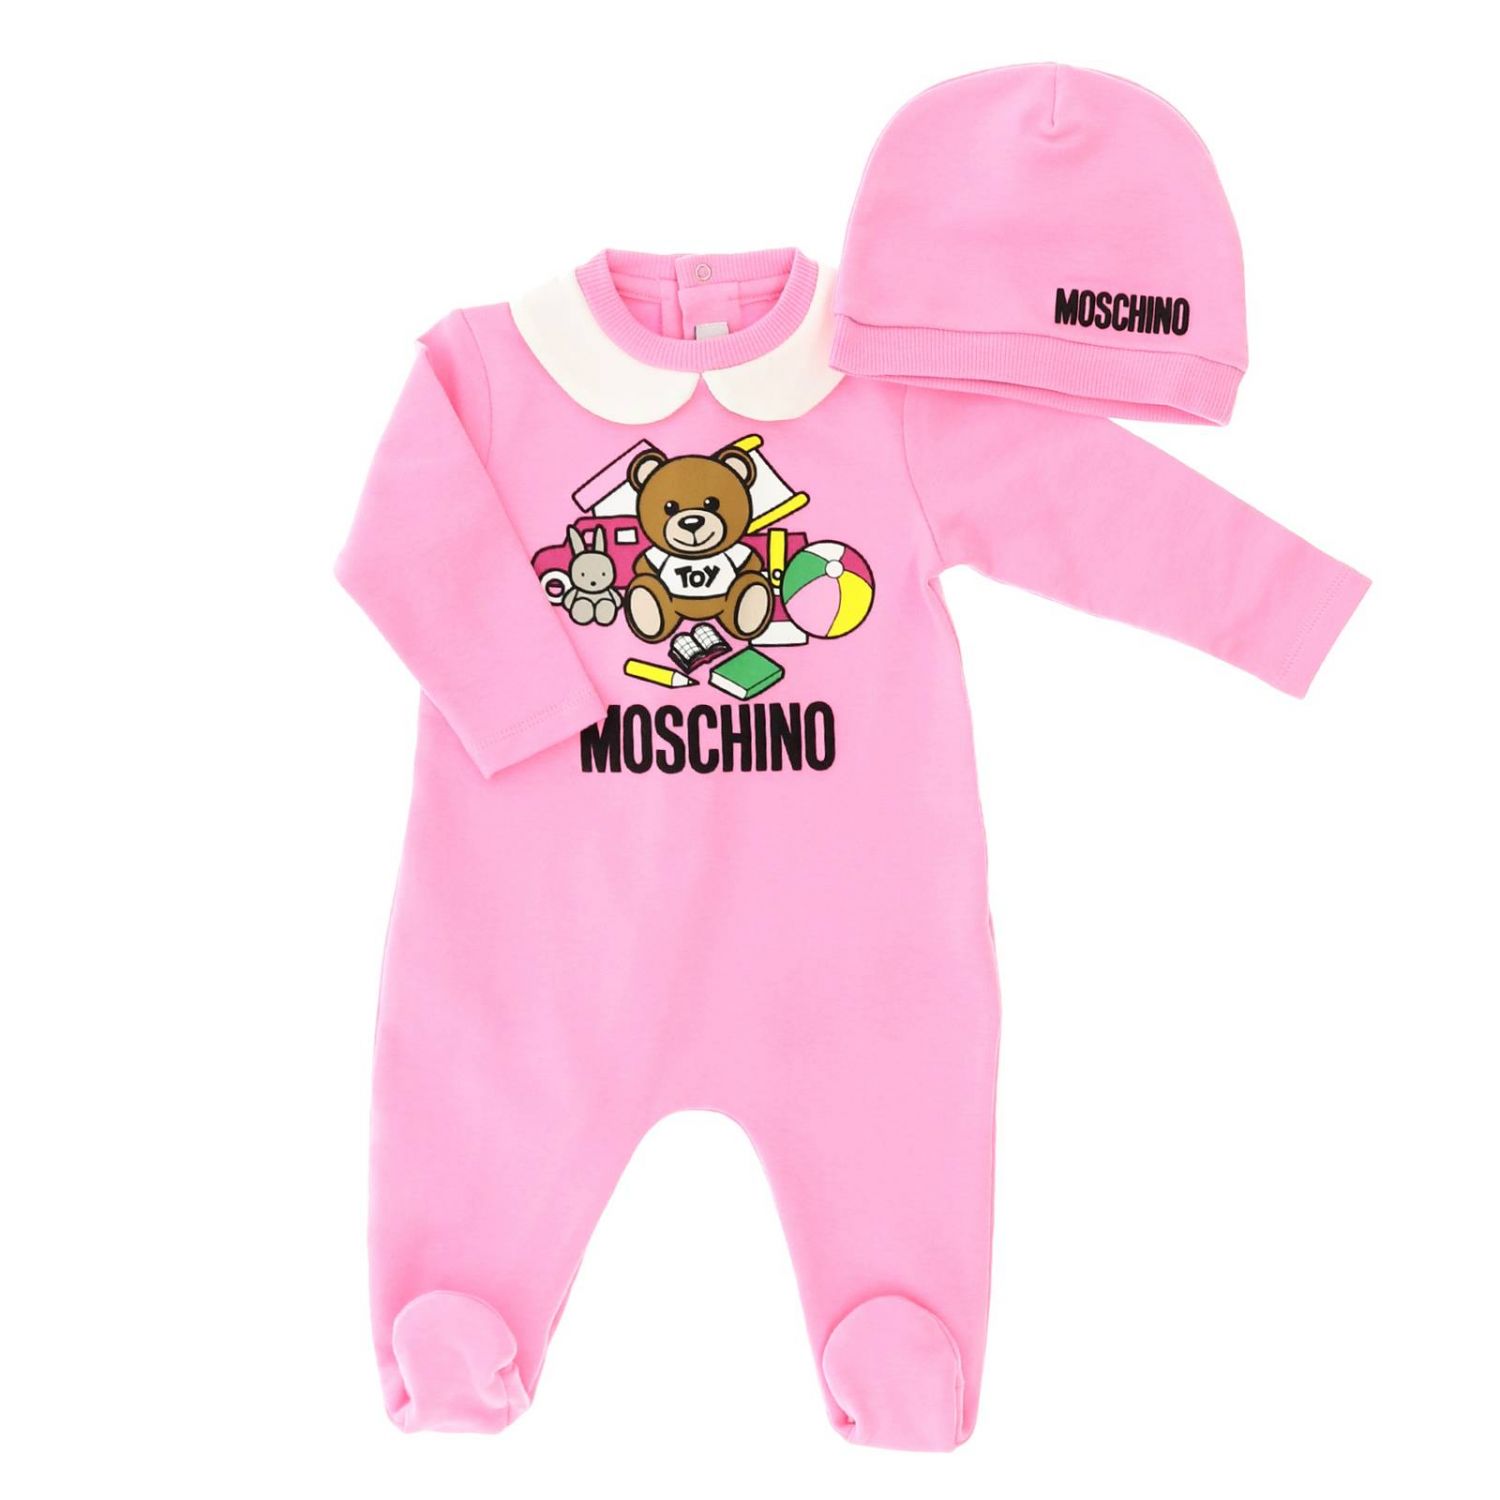 Moschino Baby Outlet: Romper kids | Romper Moschino Baby Kids Pink ...